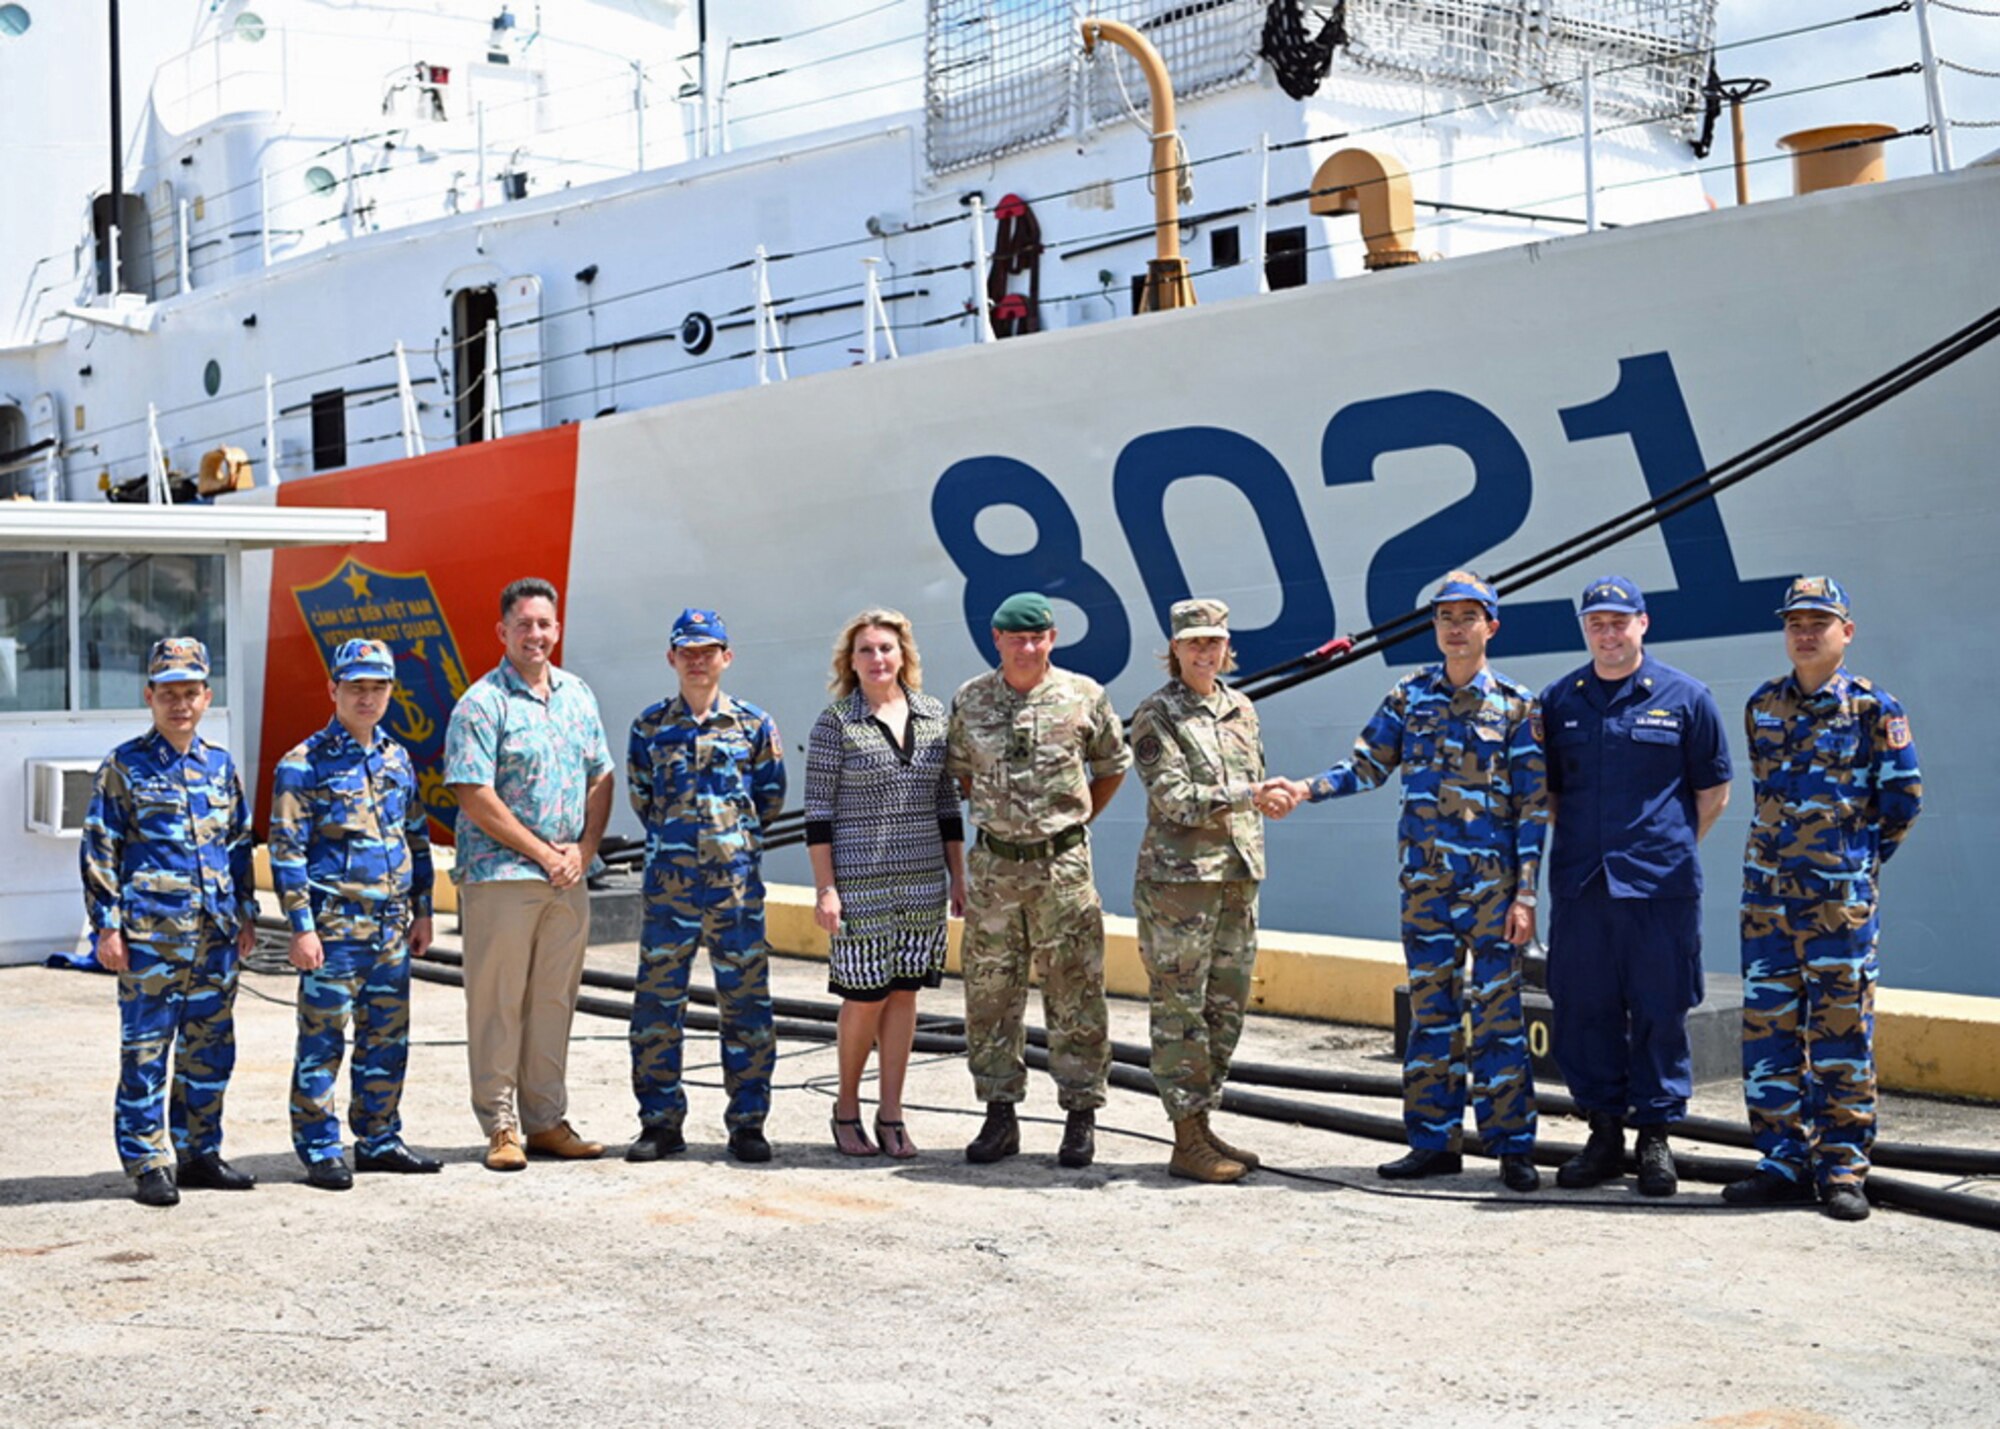 Brigadier General Jennifer Short, Deputy Director for Strategic Planning and Policy, United States Indo-Pacific Command, and Brigadier General Alan Lister from U.S. Indo-Pacific Command visited Vietnam Coast Guard ship CSB 8021 to welcome the crew to Hawaii and meet with its commanding officer, Commander Dang Le Son. (U.S. Navy photo by Mass Communication Specialist 1st Class Melvin Gonzalvo/Released)